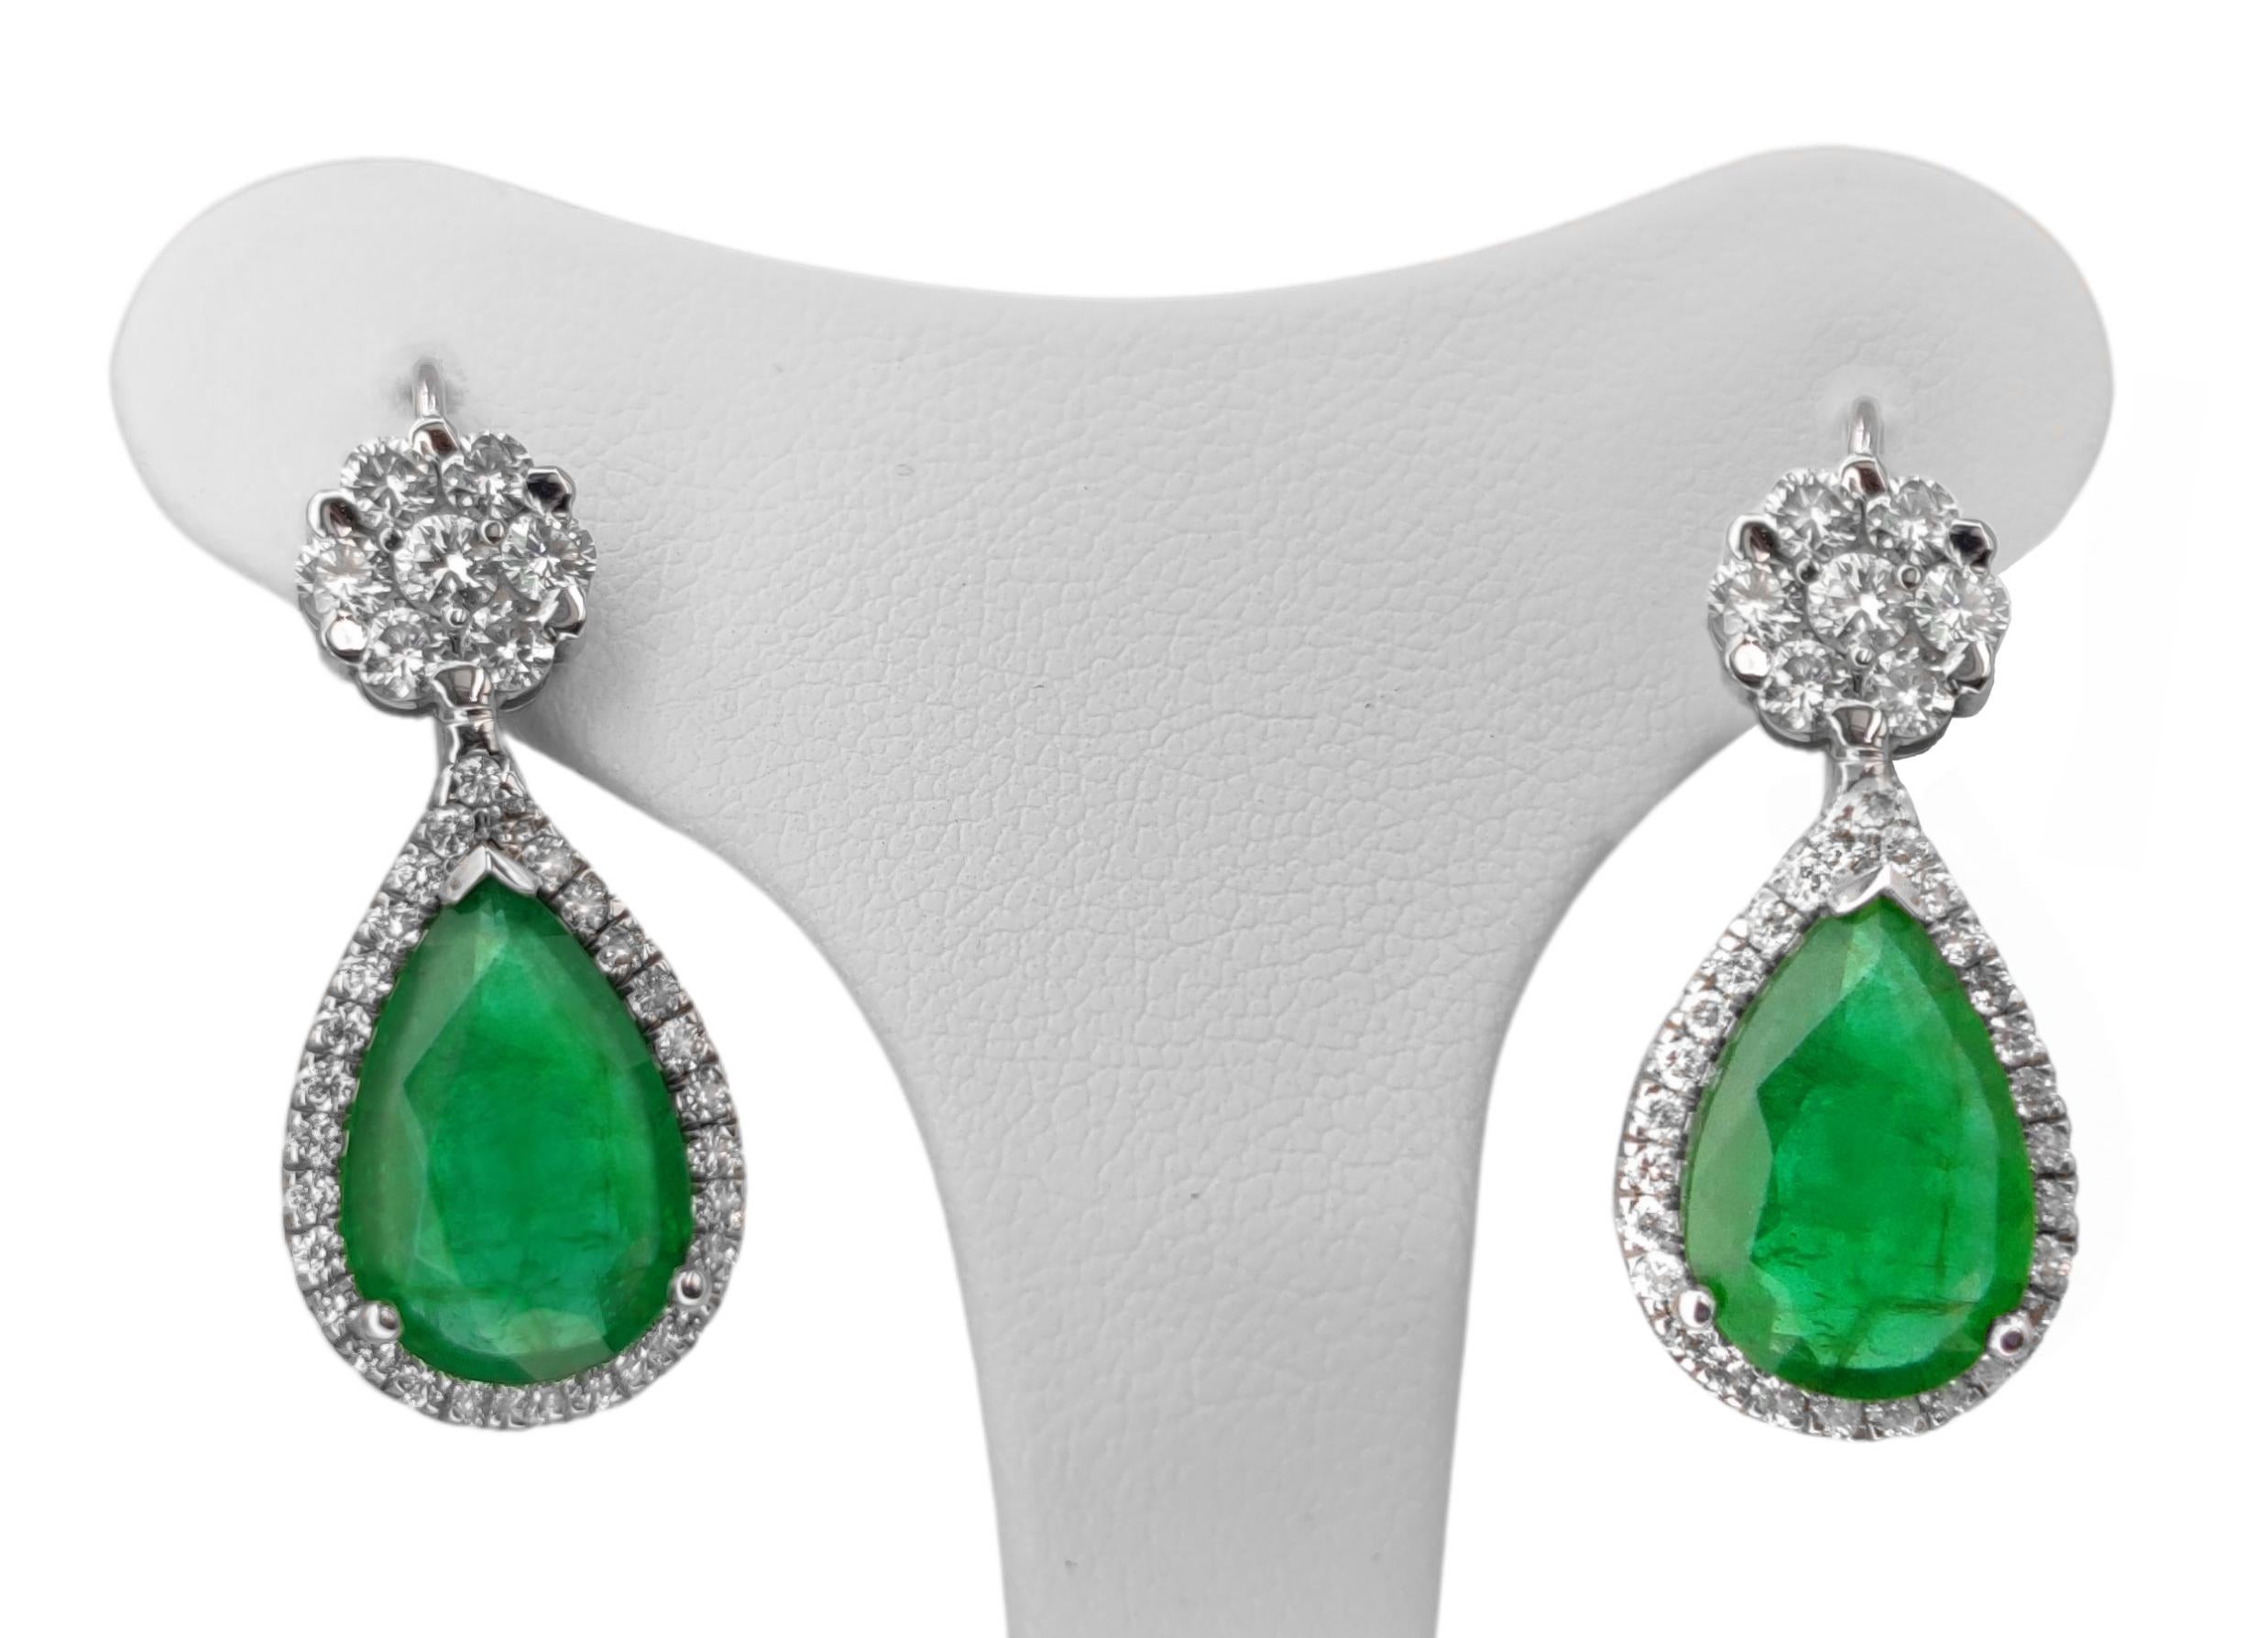 Made in Italy amazing and very classy 7.10 carats earrings composed by 5.60 carats of natural emeralds with an intense green color that is much more beautiful in person. 

This dangle earrings are perfect for that special occasion and they have